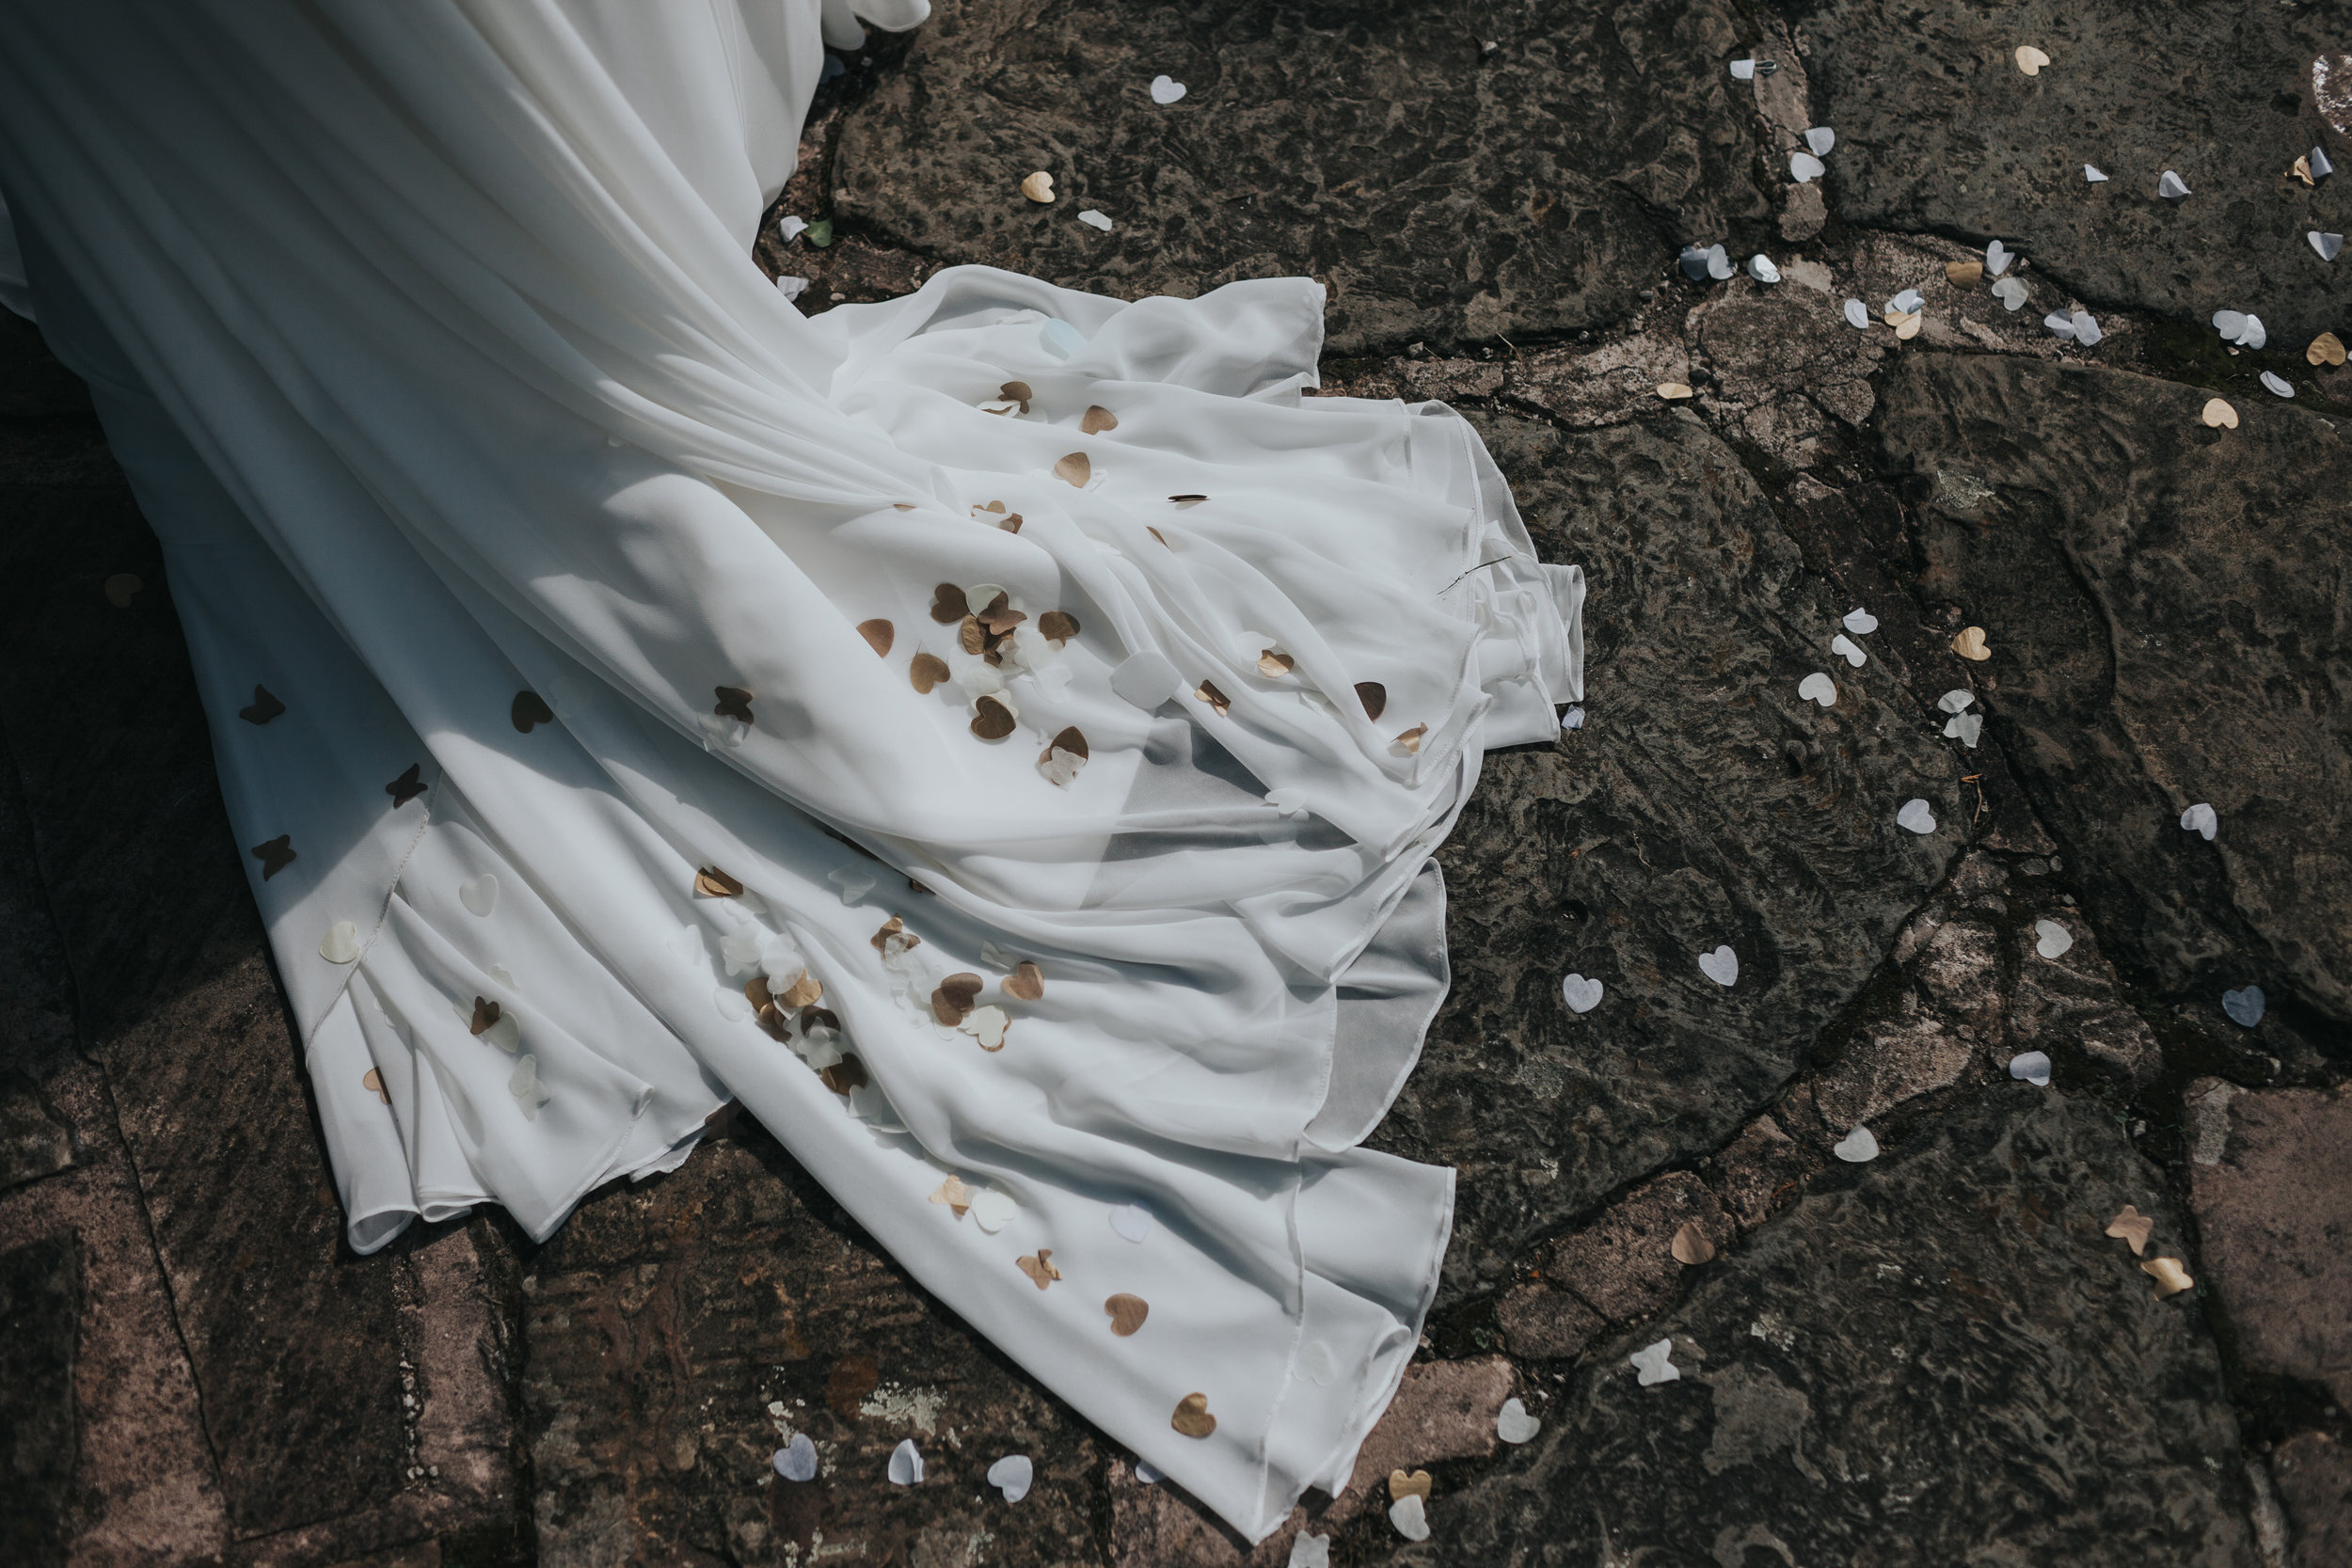 The trail of the Brides wedding dress is covered in heart shaped confetti. 